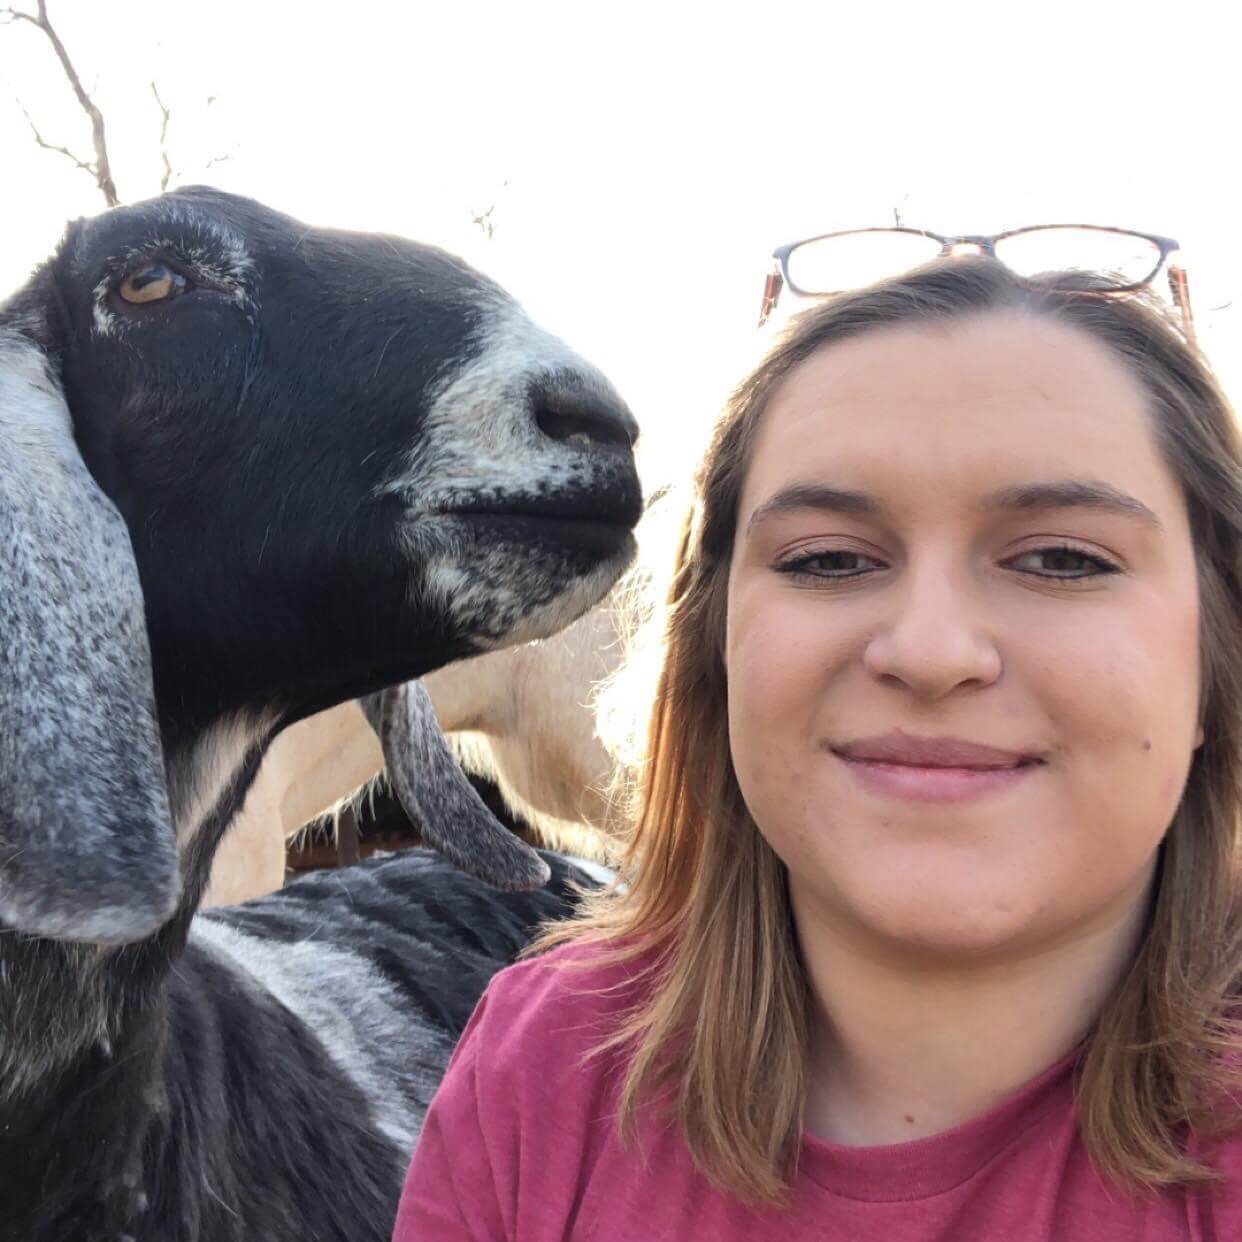 Dakota, our new VP, with her goat